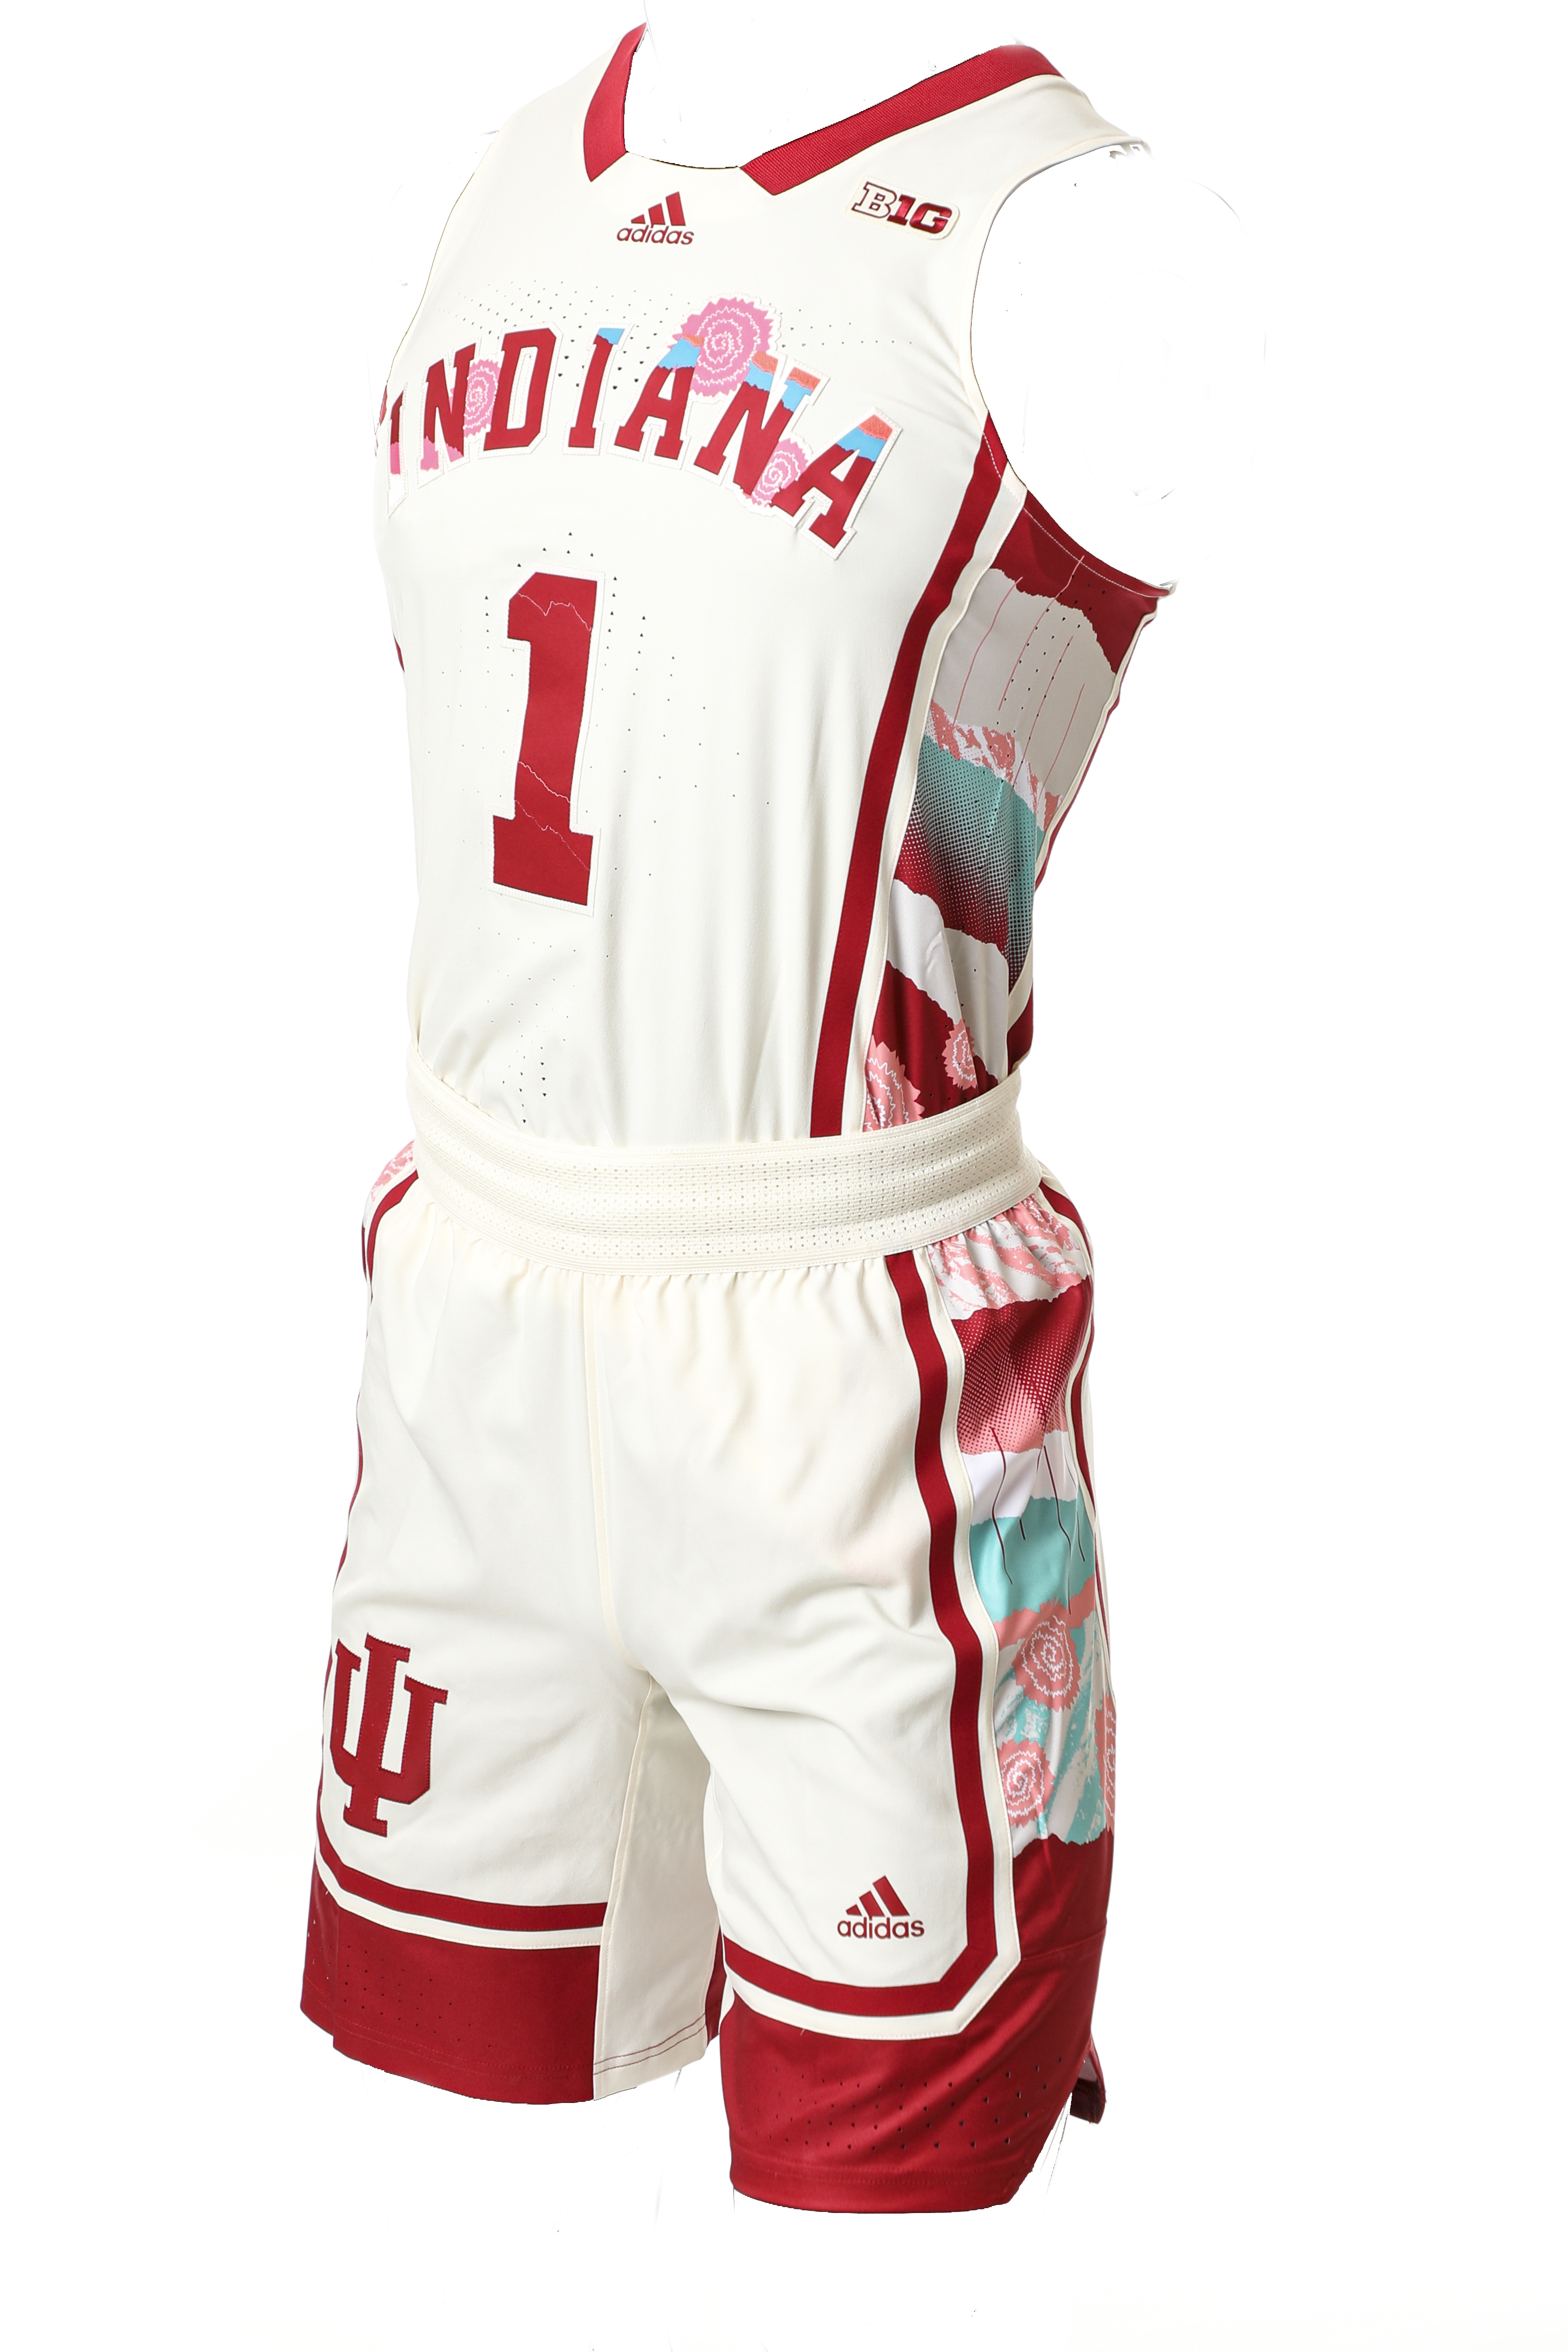 Indiana To Wear Special Jerseys Thursday as Part of Black History Month -  Sports Illustrated Indiana Hoosiers News, Analysis and More